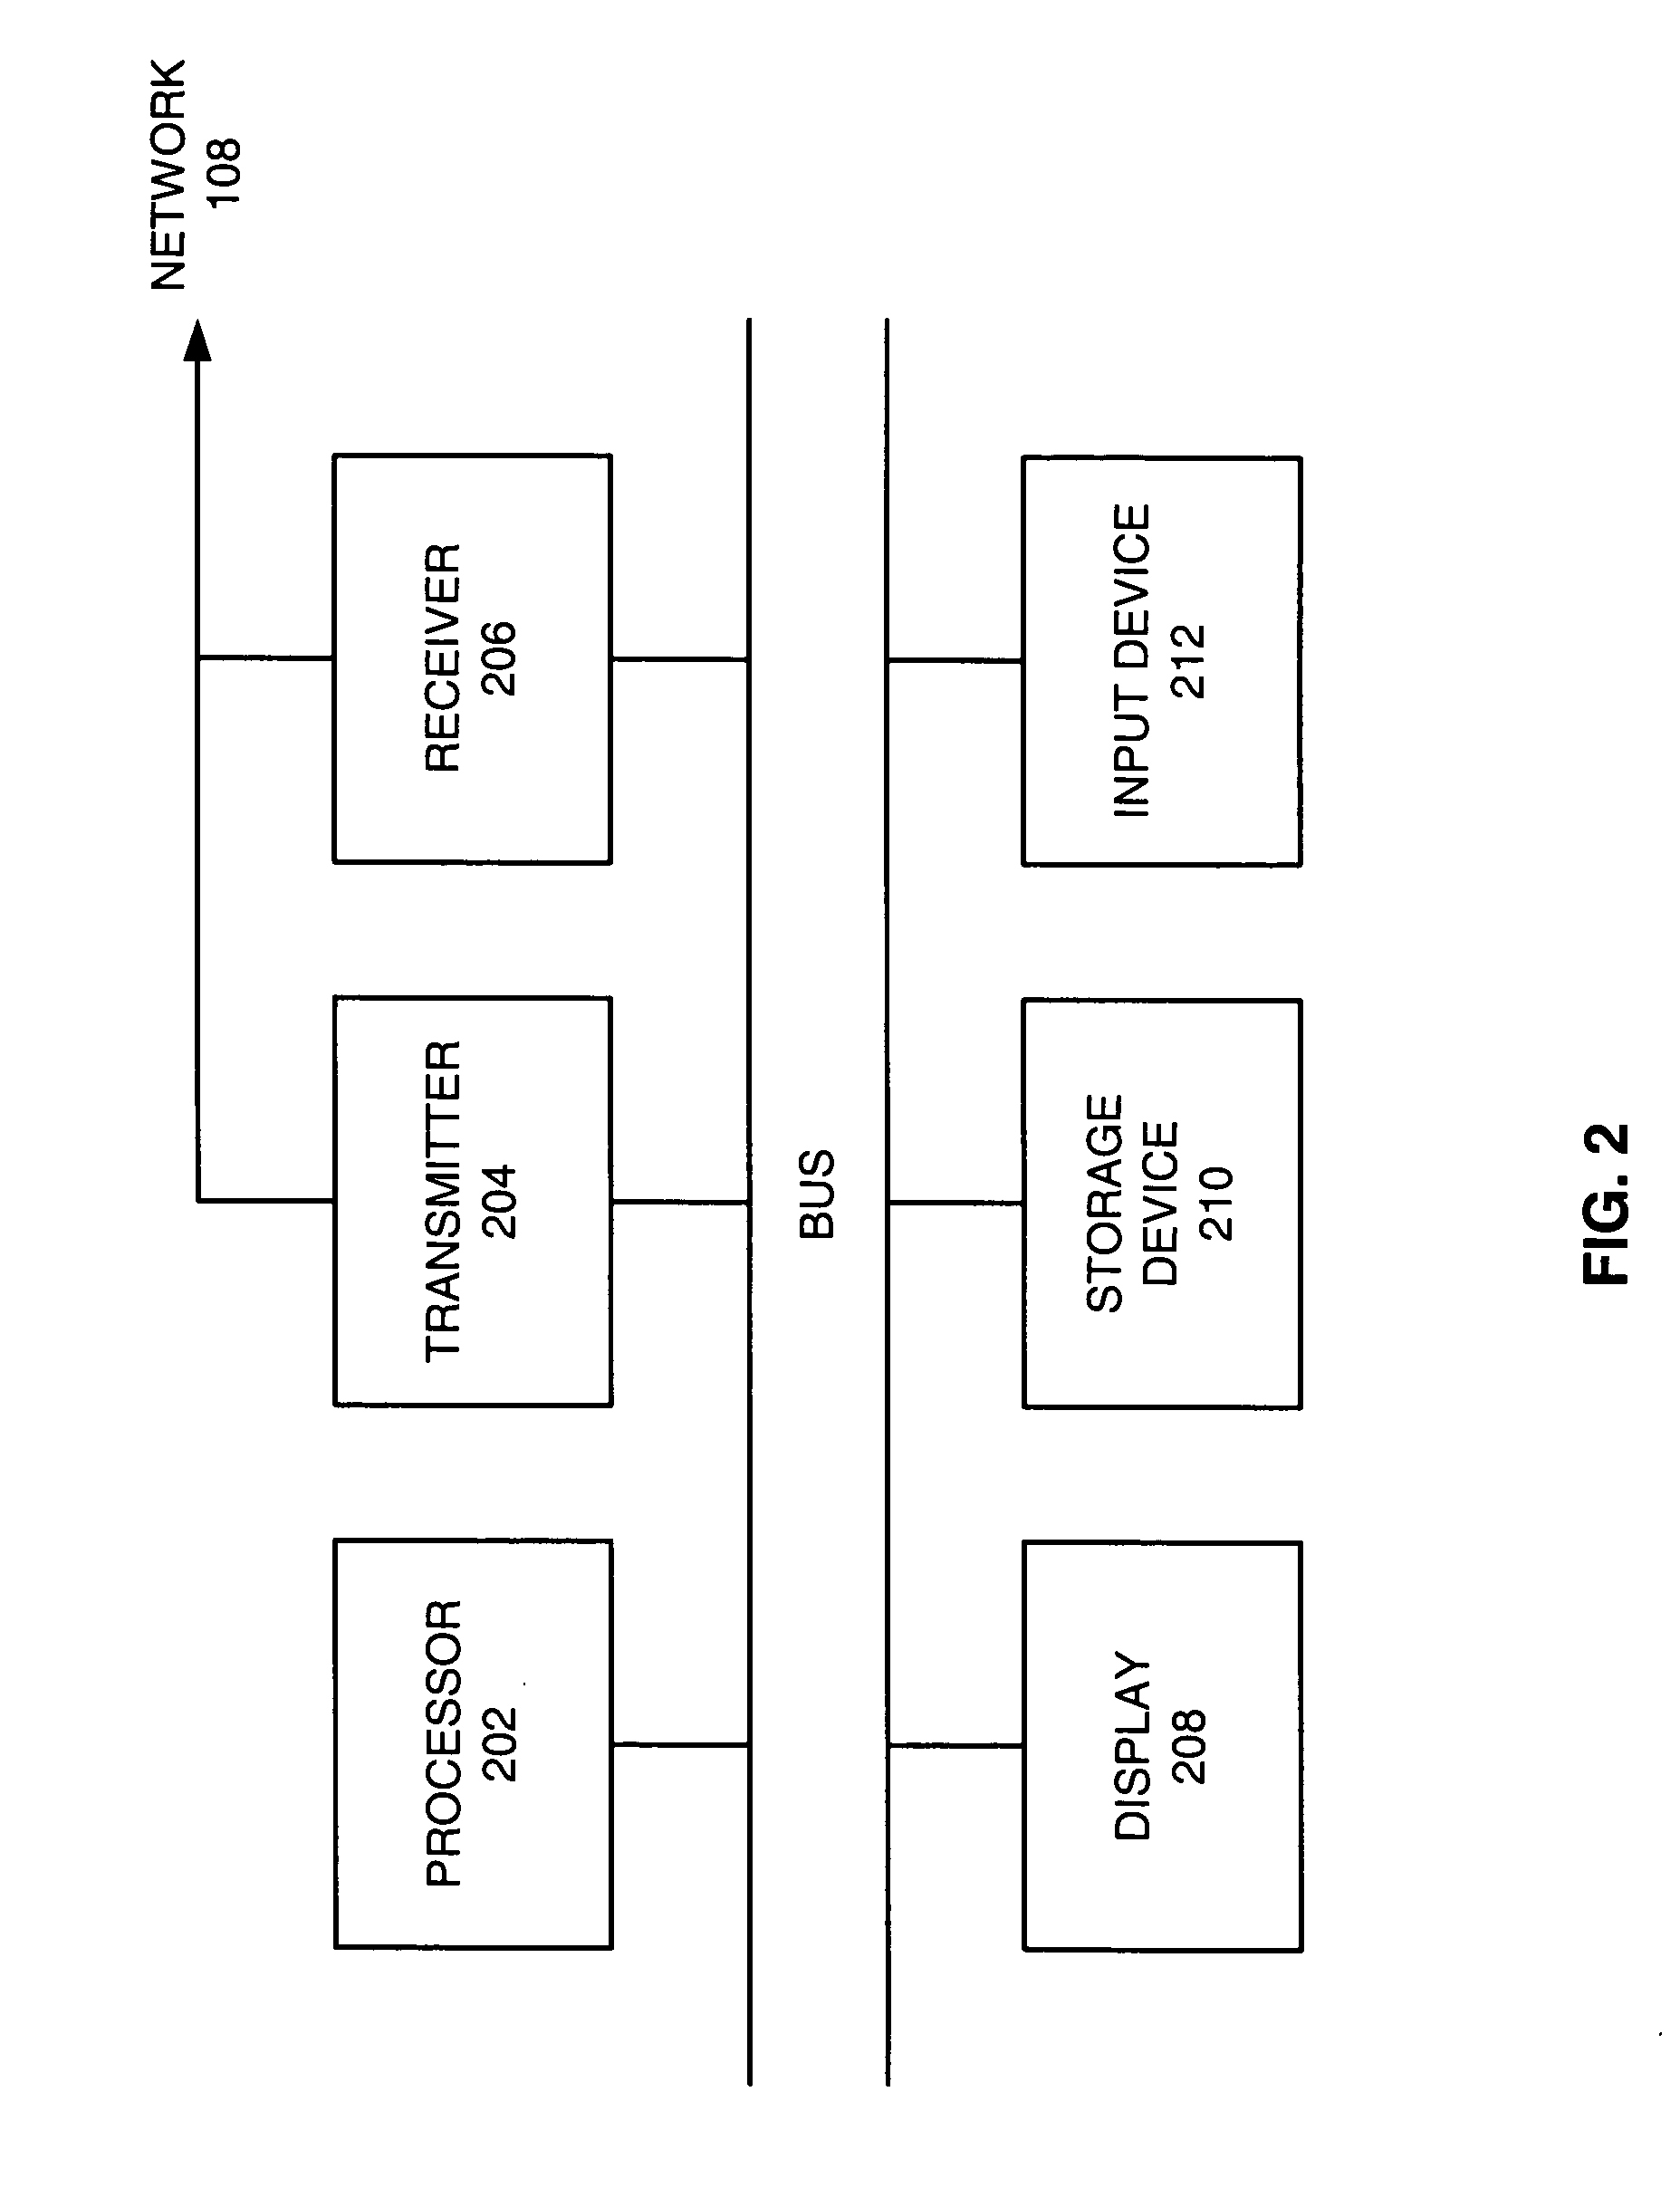 Systems and methods for tracking web activity